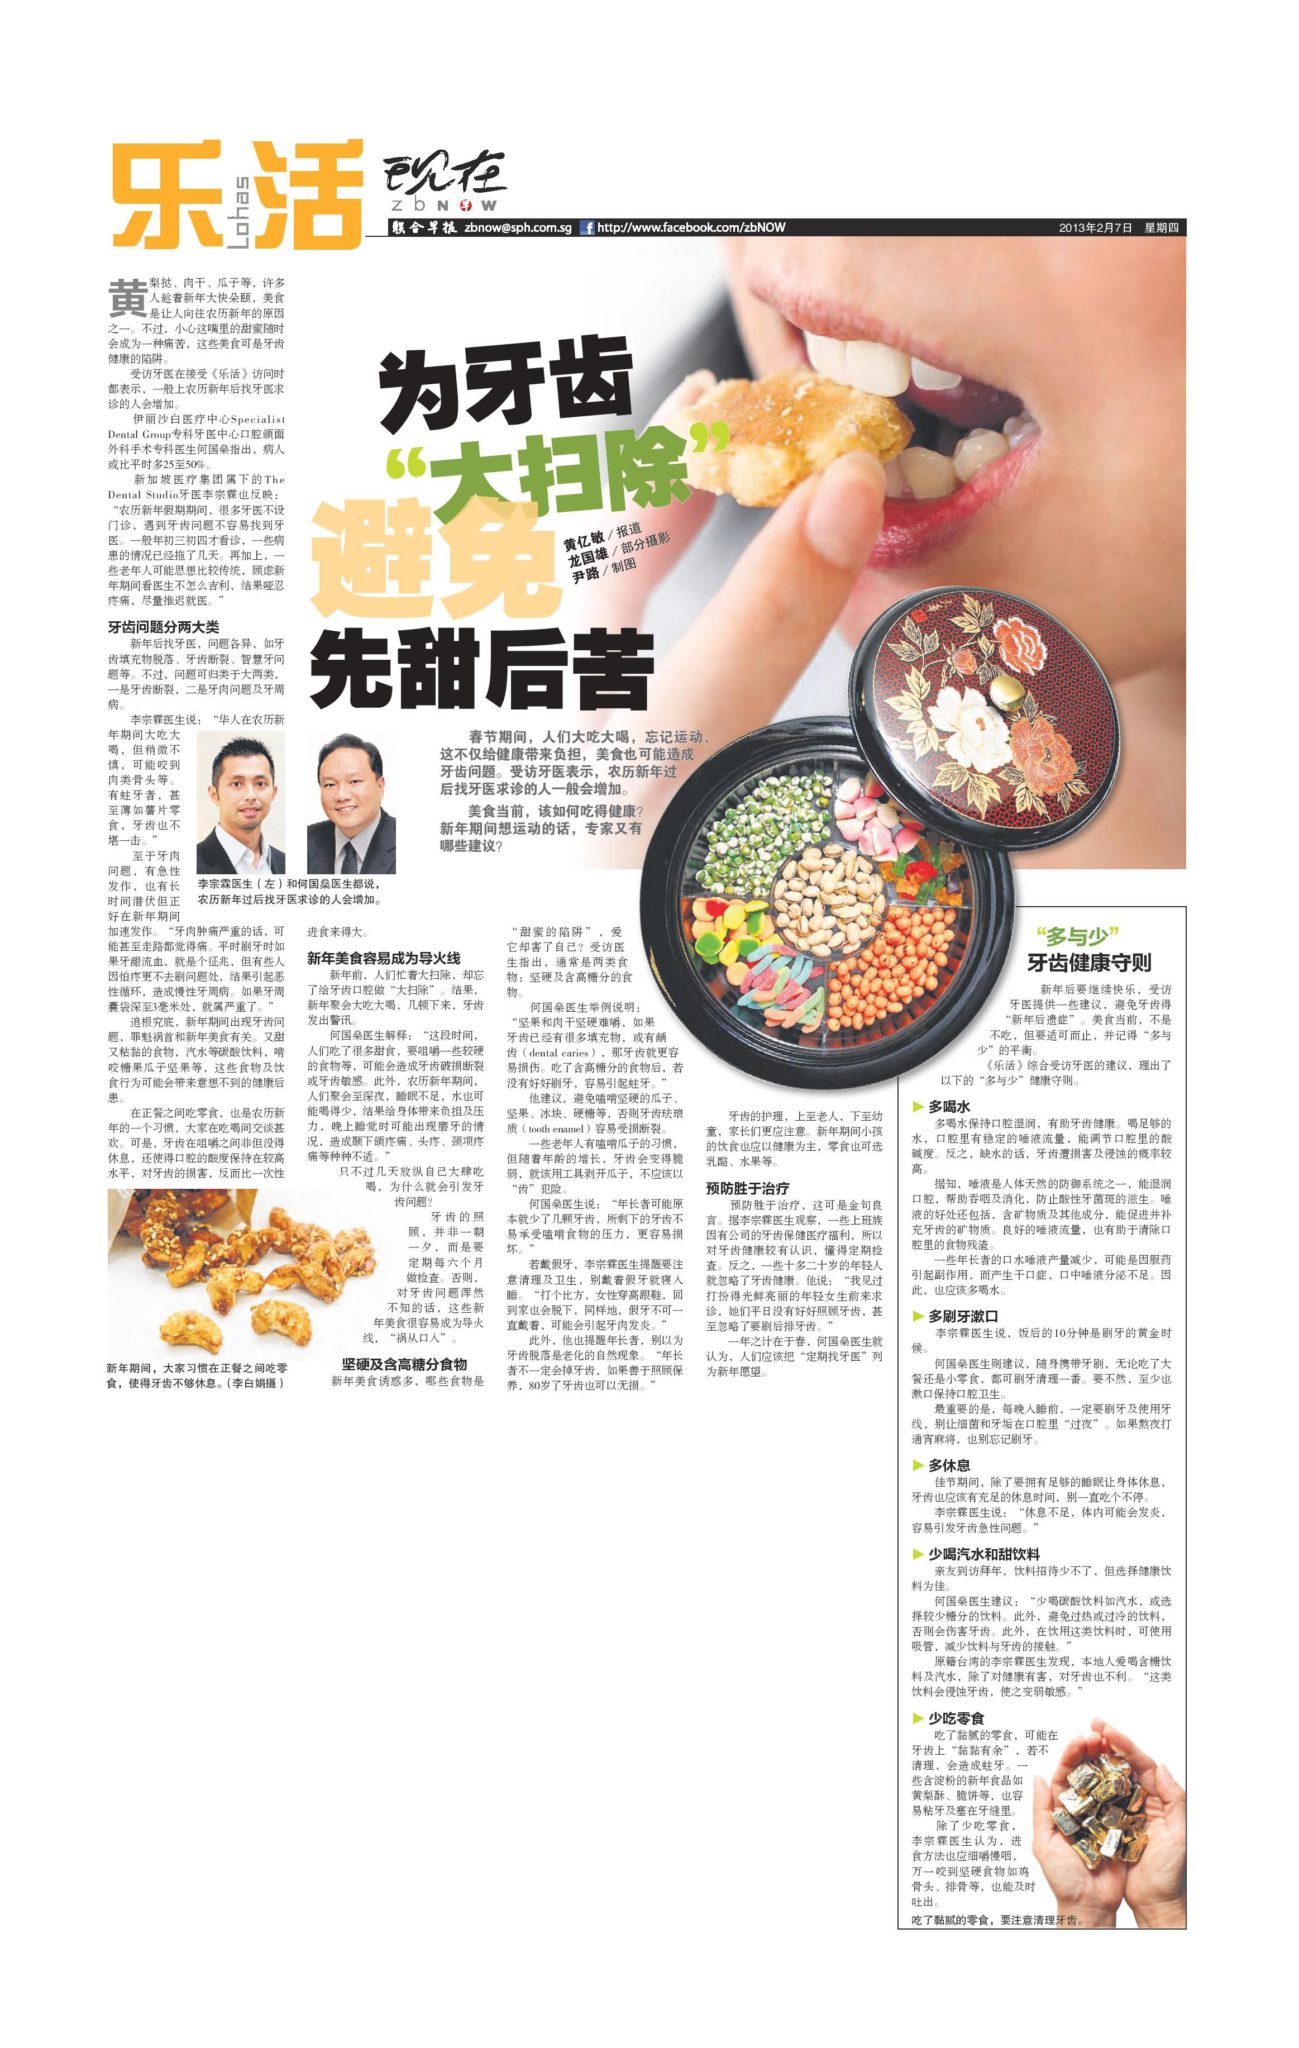 Lianhe Zaobao, February 7, 2013: “Spring Clean” Your Mouth This Chinese New Year (id)